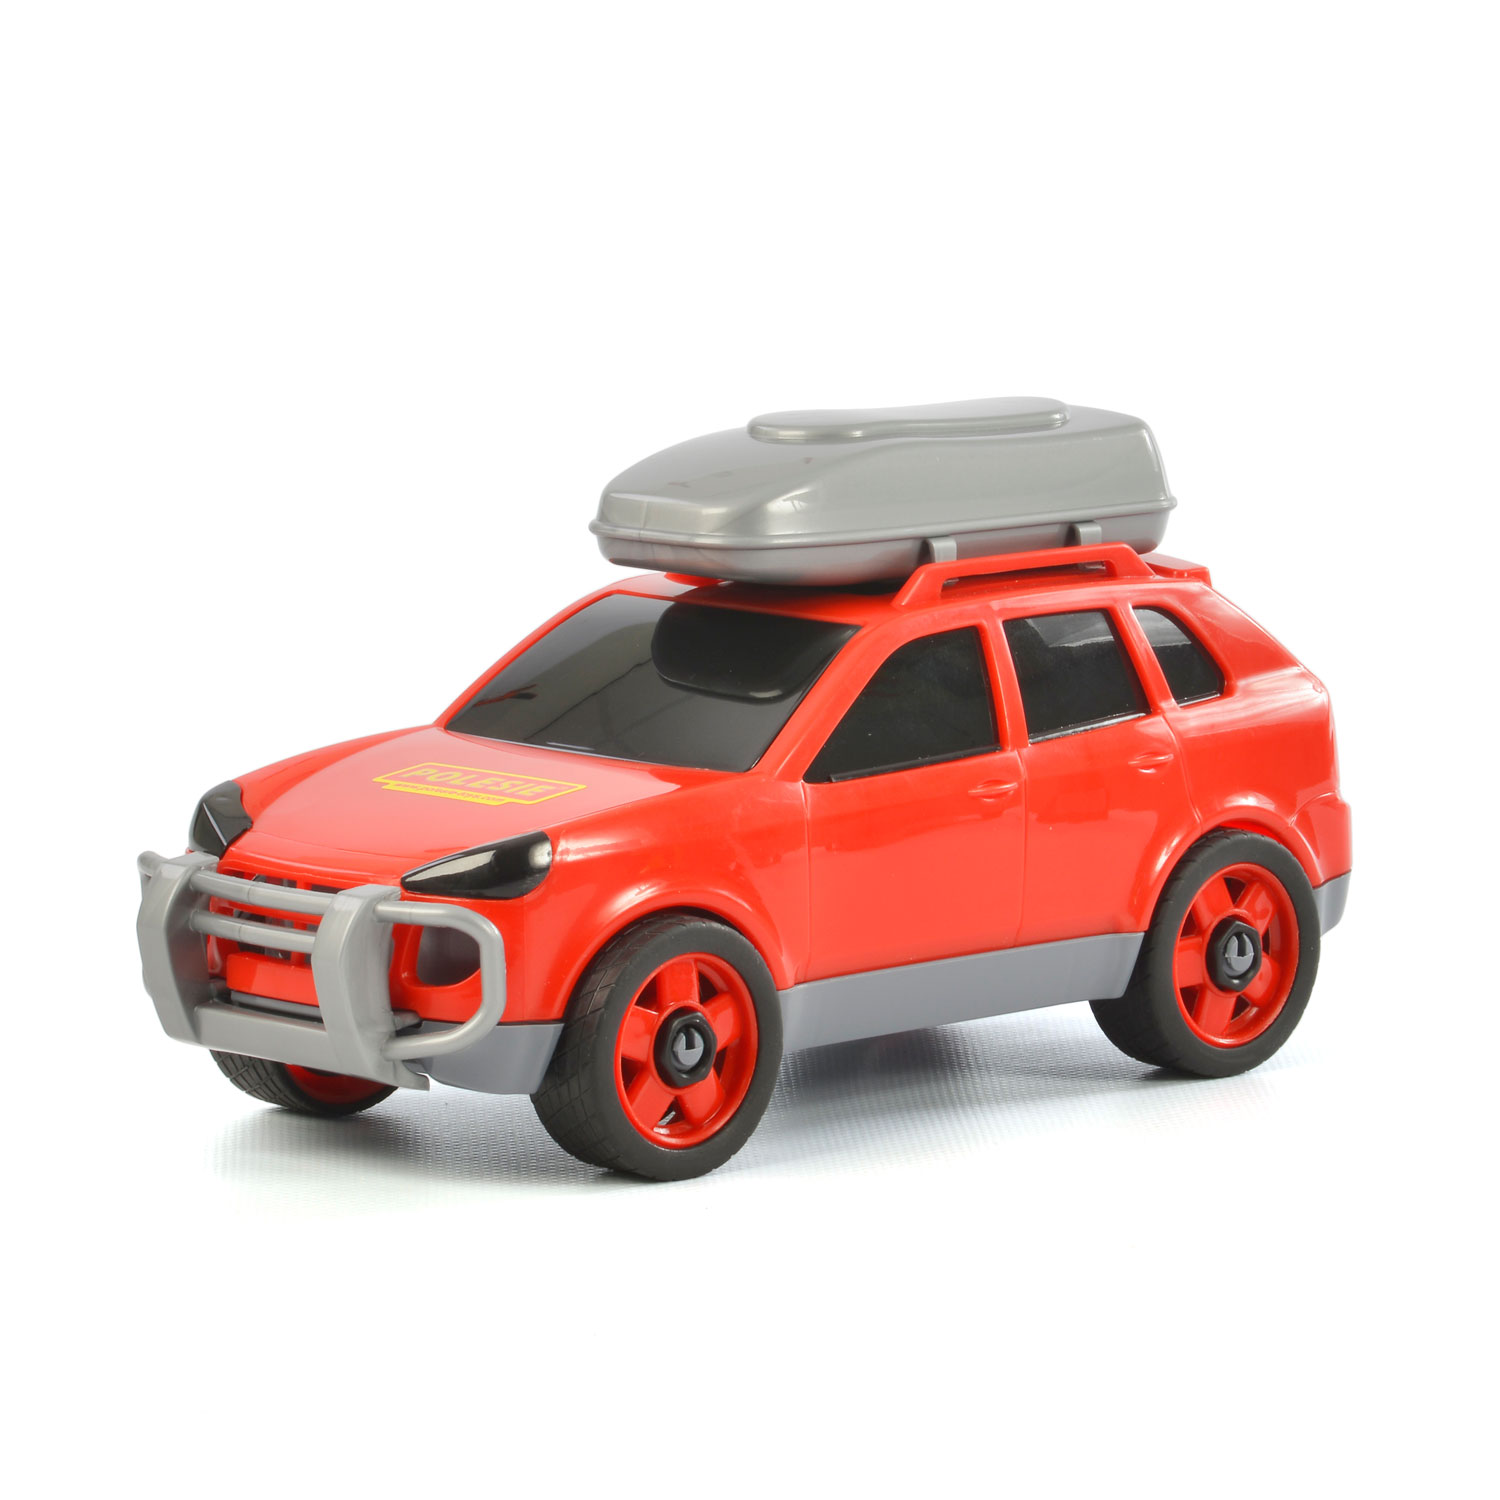 Auto with roof box | Thimble Toys